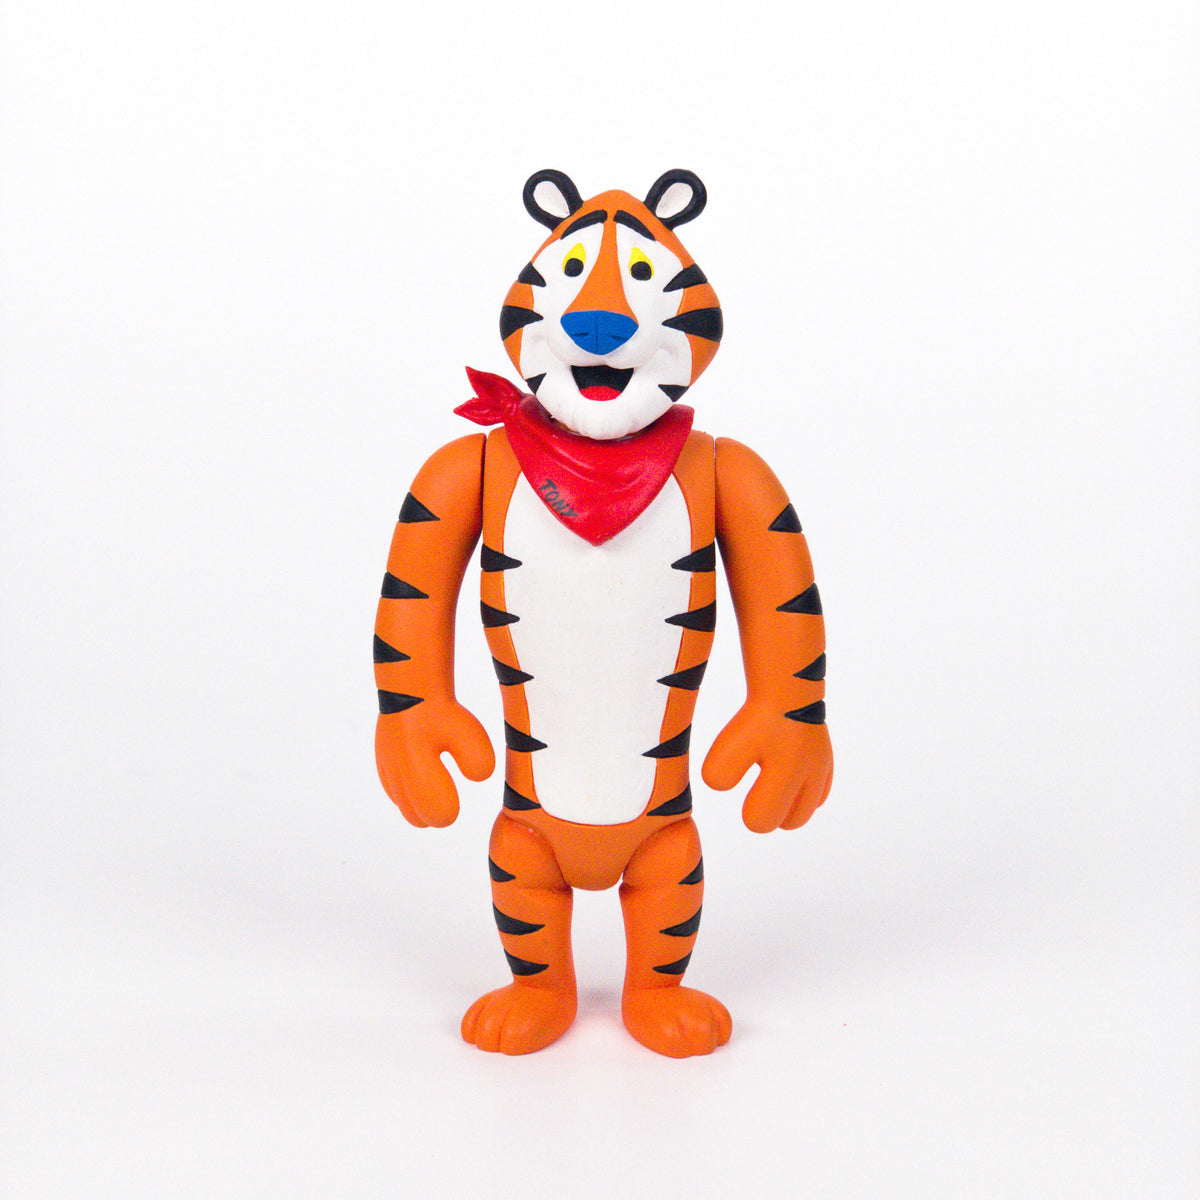 Kellogg's Frosted Flakes Tony The Tiger — JawnsOver